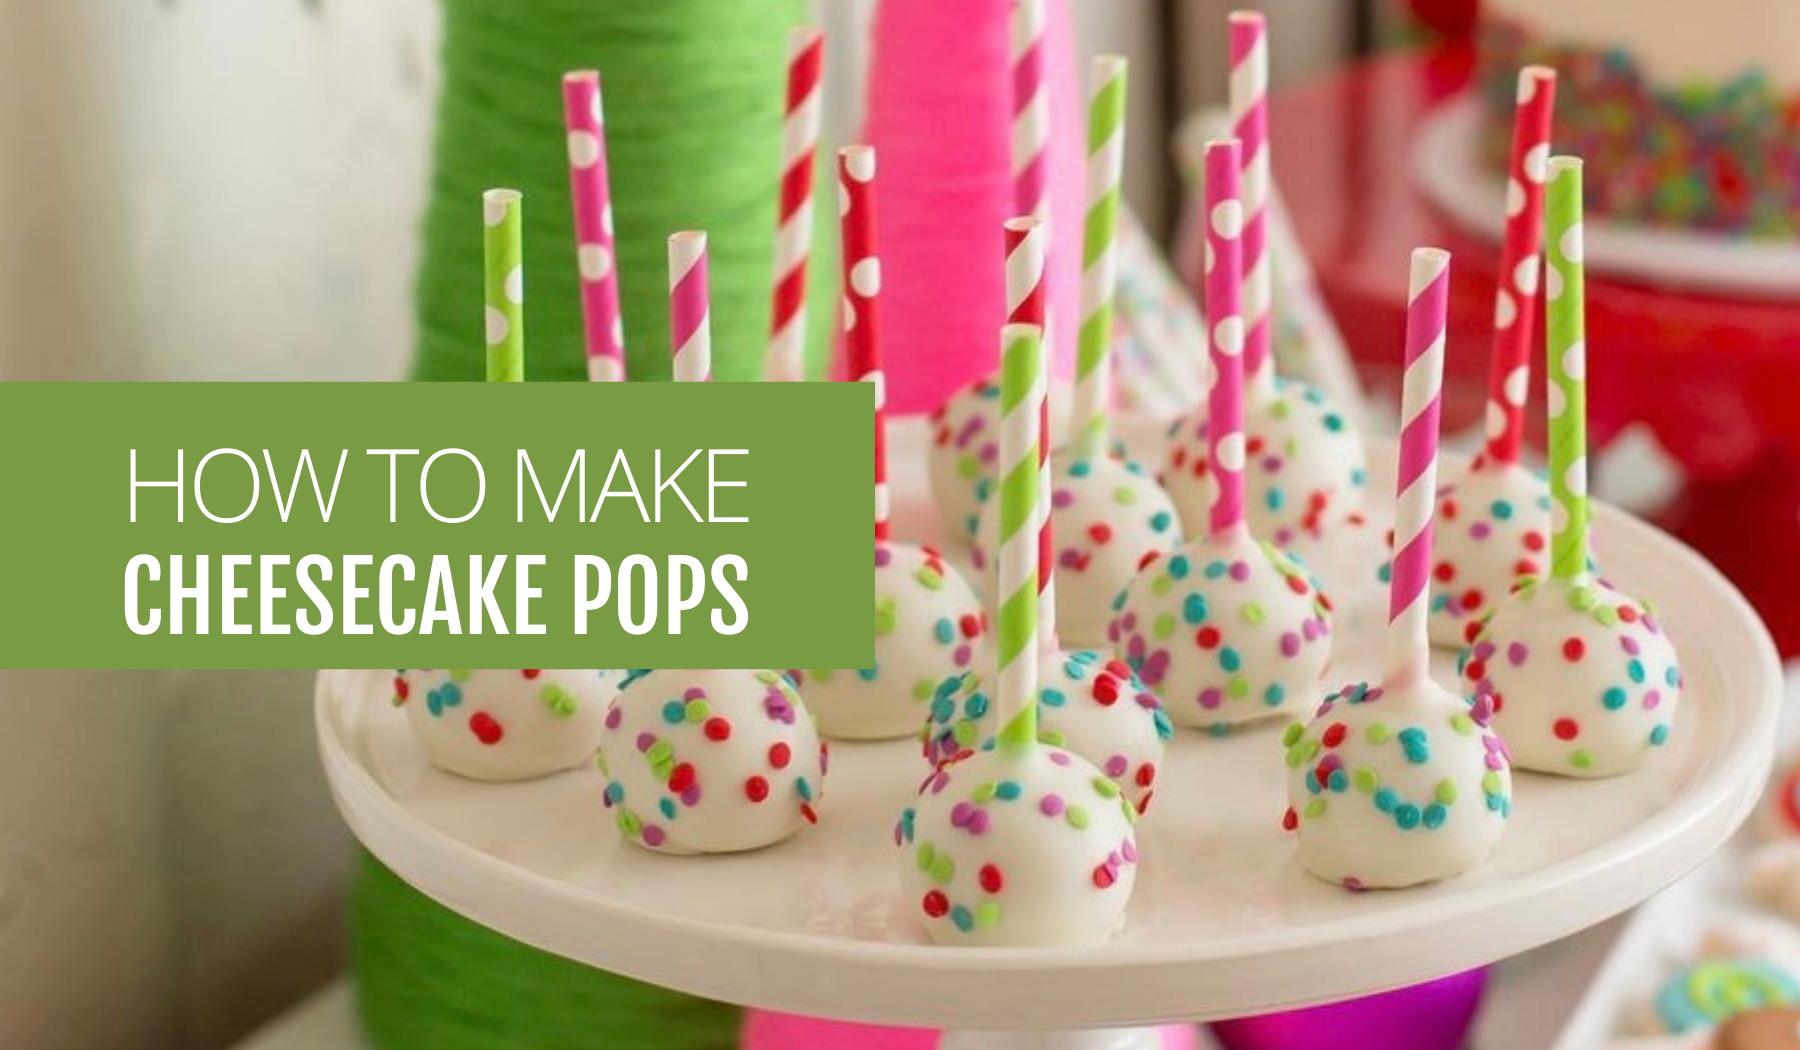 HOW TO MAKE CHEESECAKE POPS